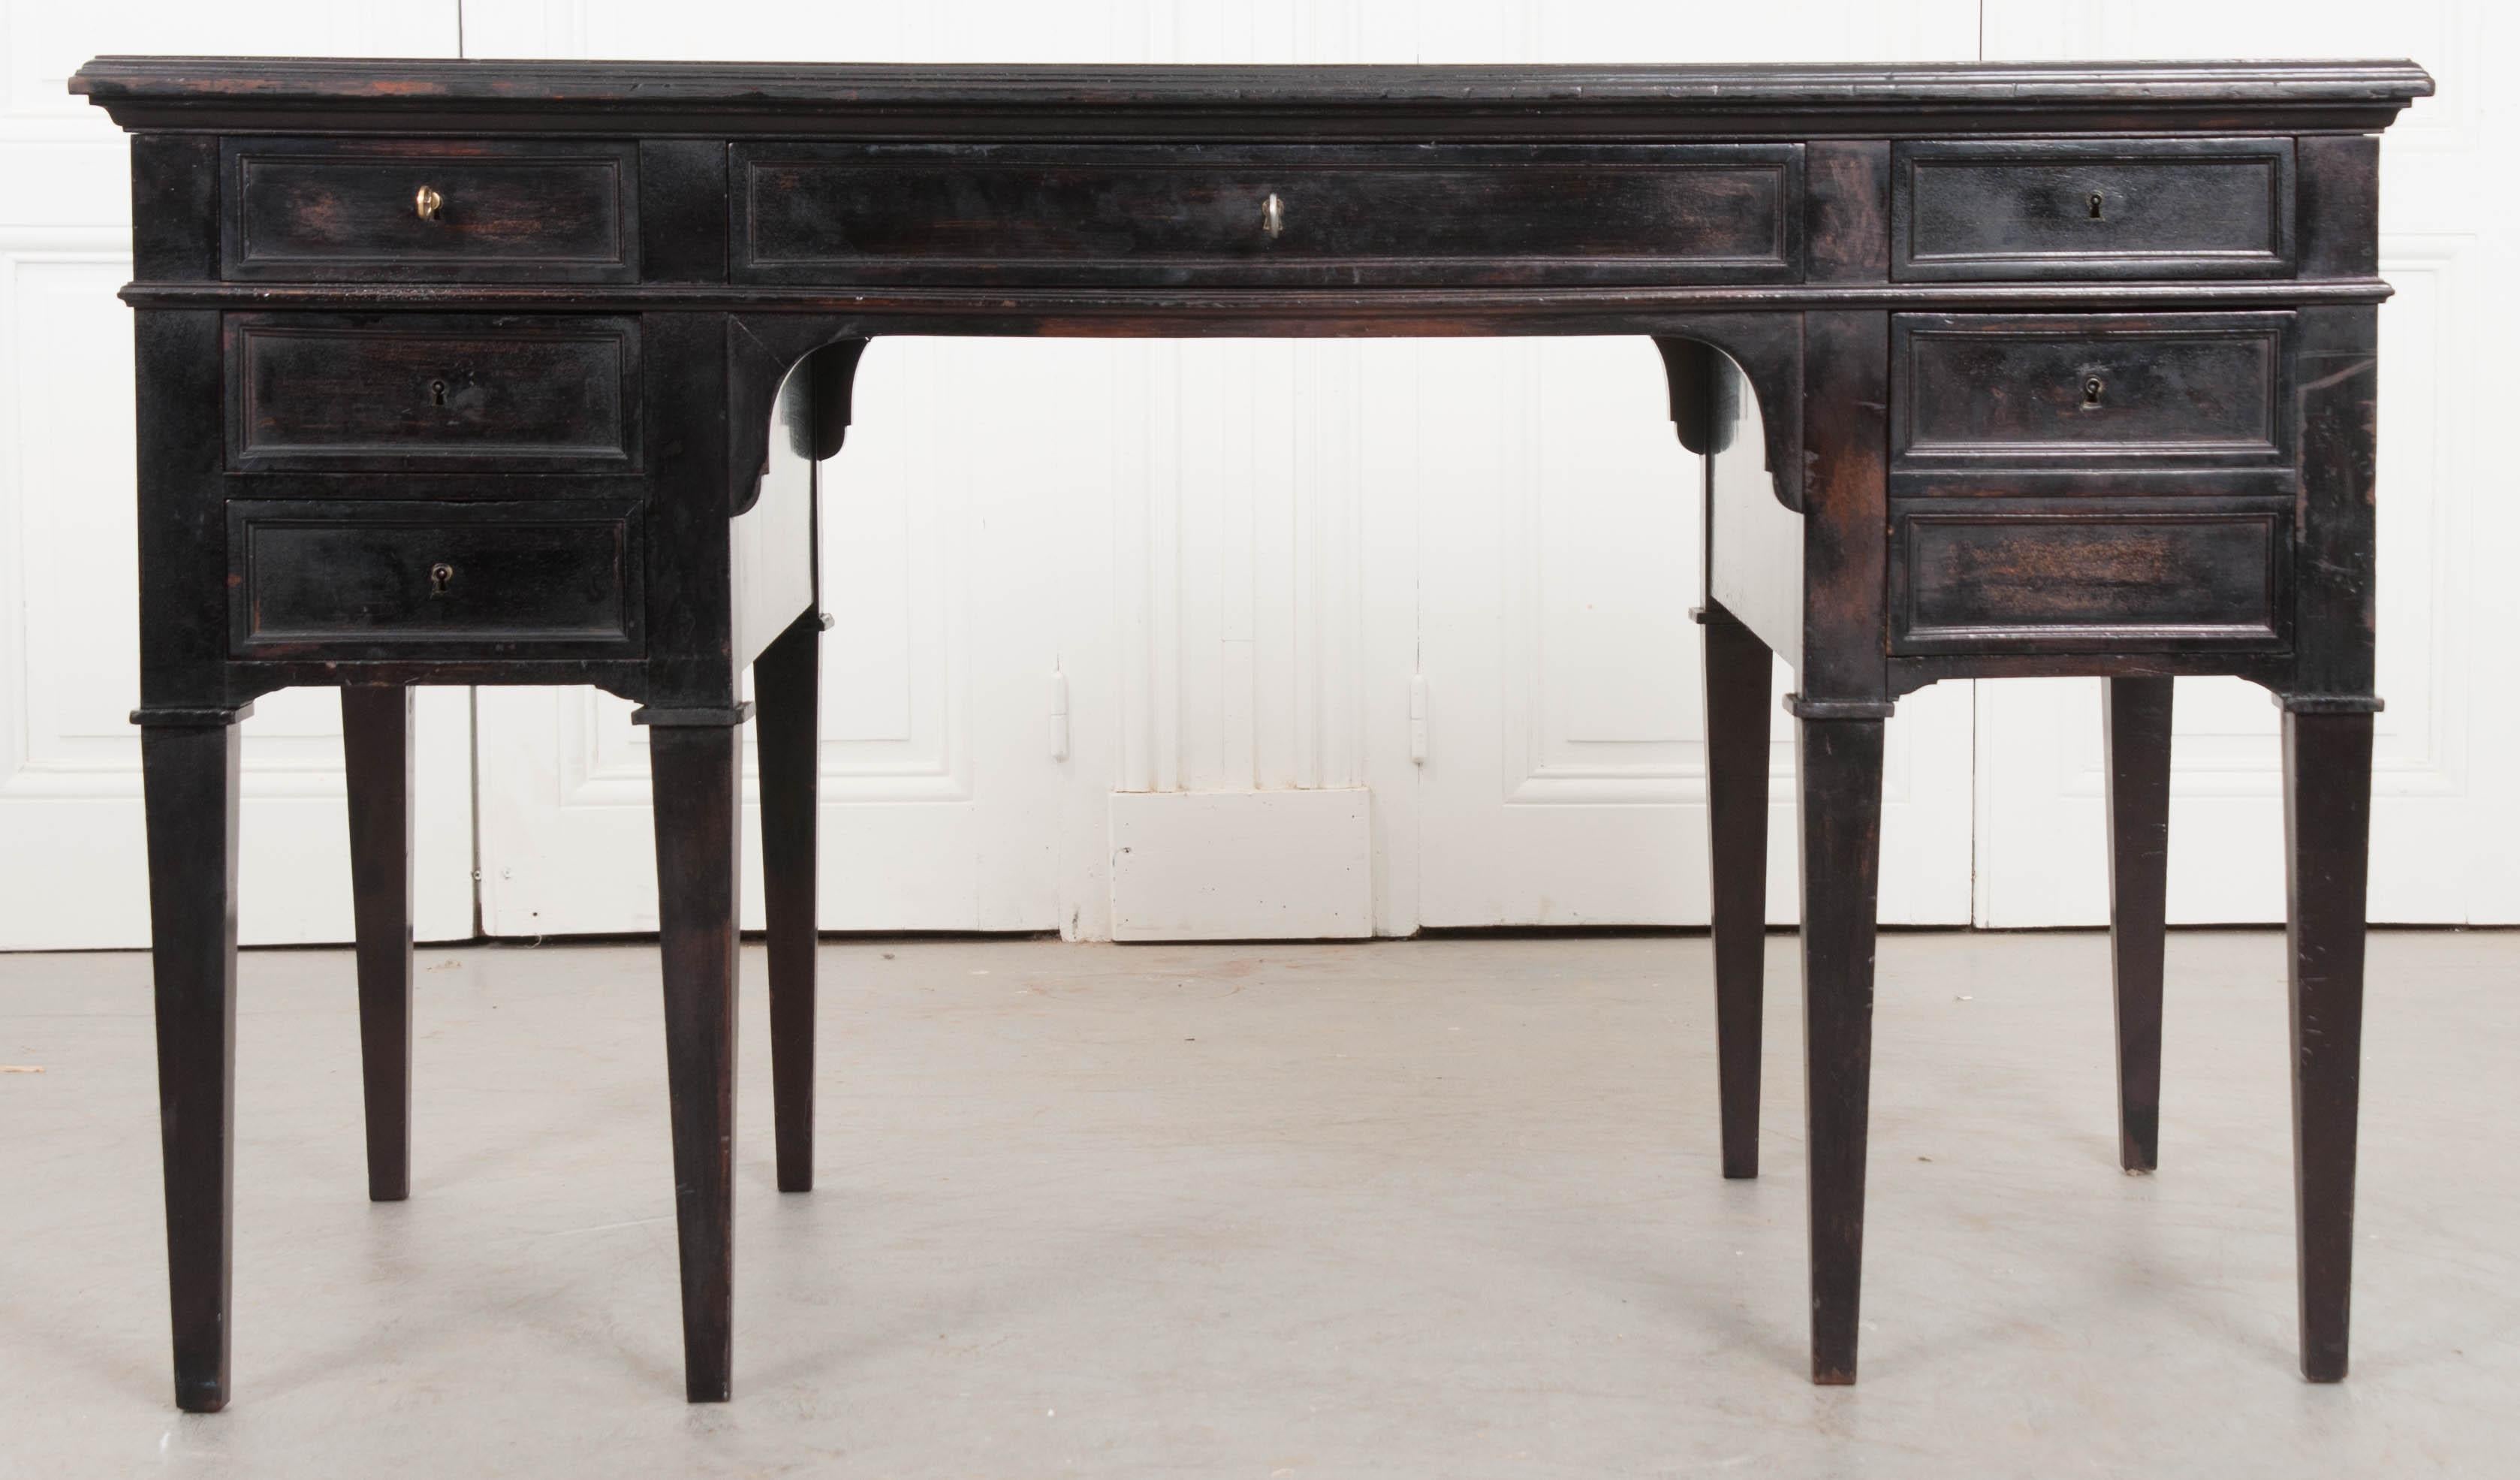 An elegant and refined French Directoire-style ebonized mahogany desk, c. 1800's, with inset tanned-and-tooled leather blotter and slide-out writing surfaces on each side that have richly deepened in color over time. Although it appears to have